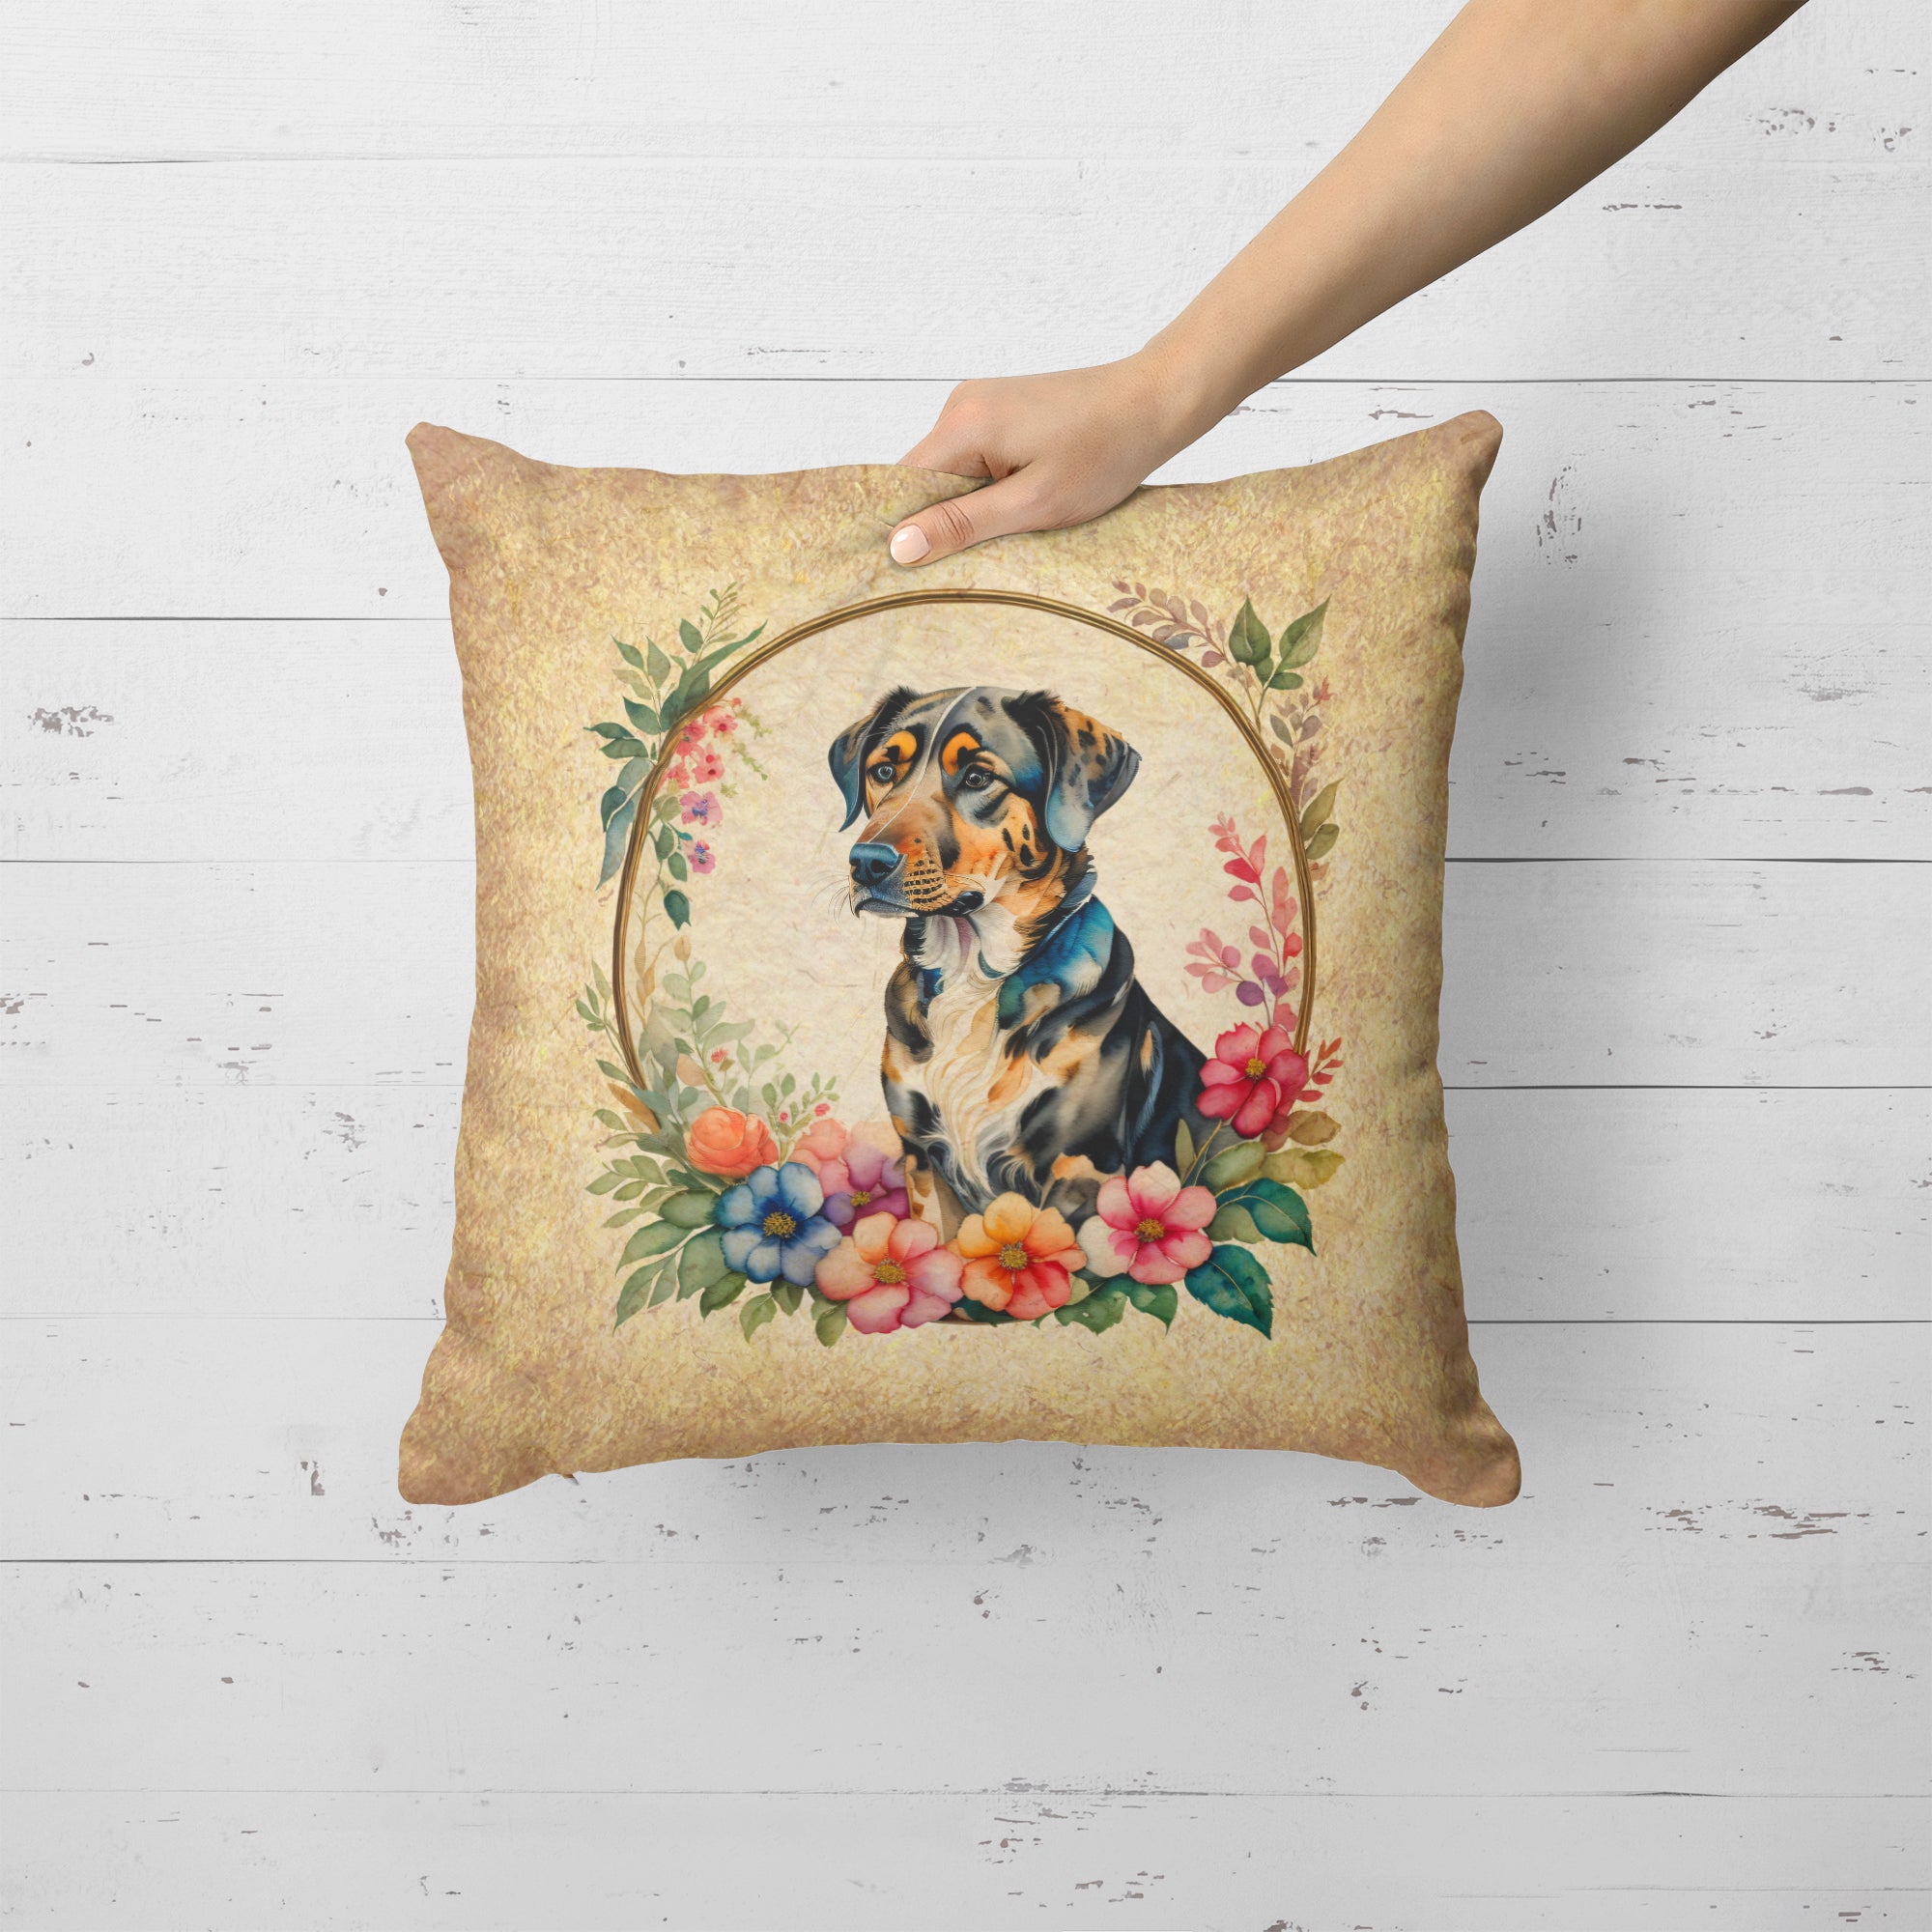 Catahoula Leopard Dog and Flowers Fabric Decorative Pillow